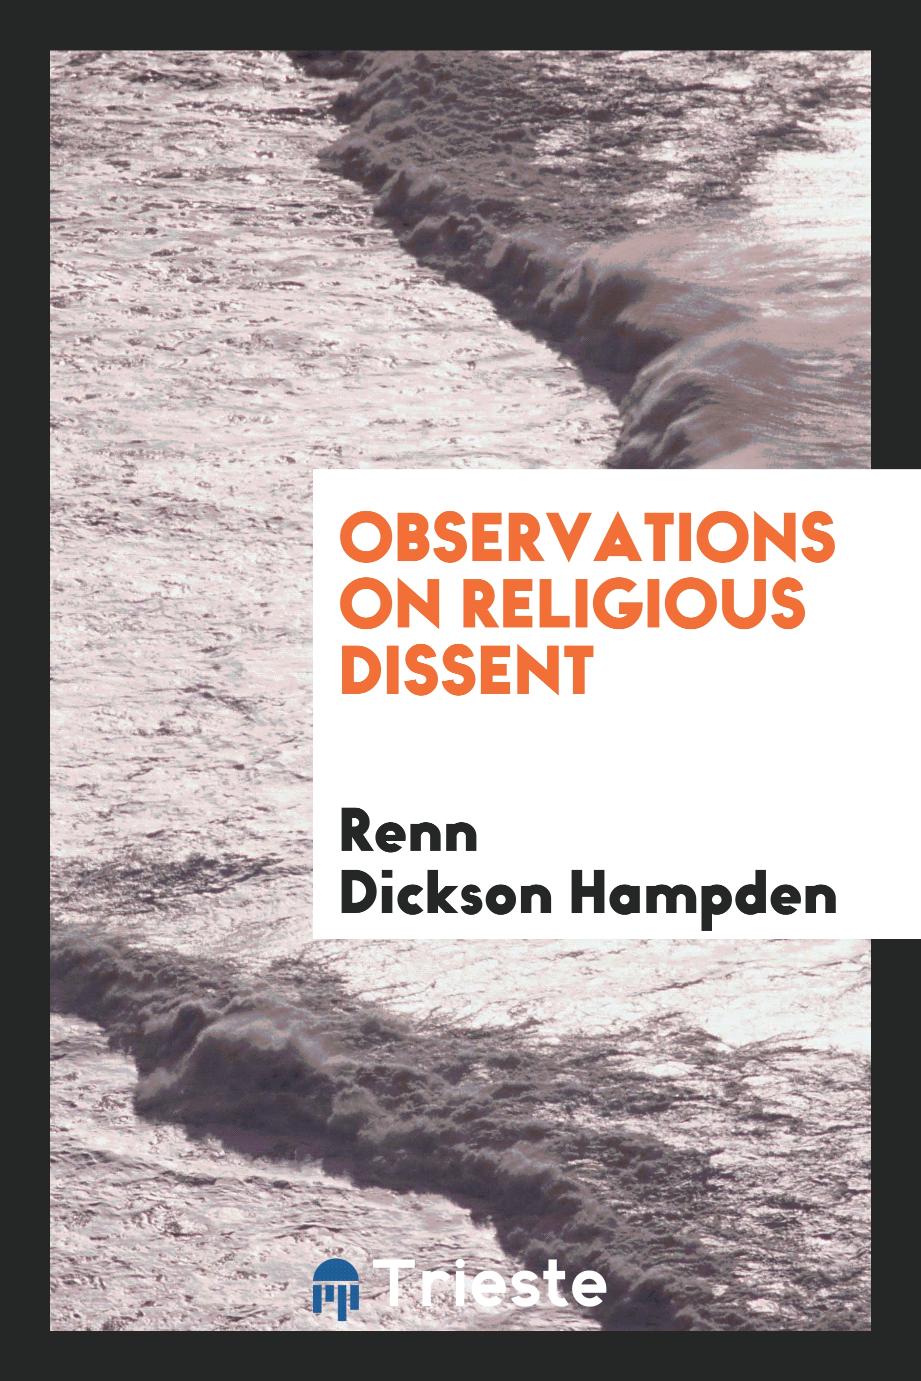 Observations on religious dissent